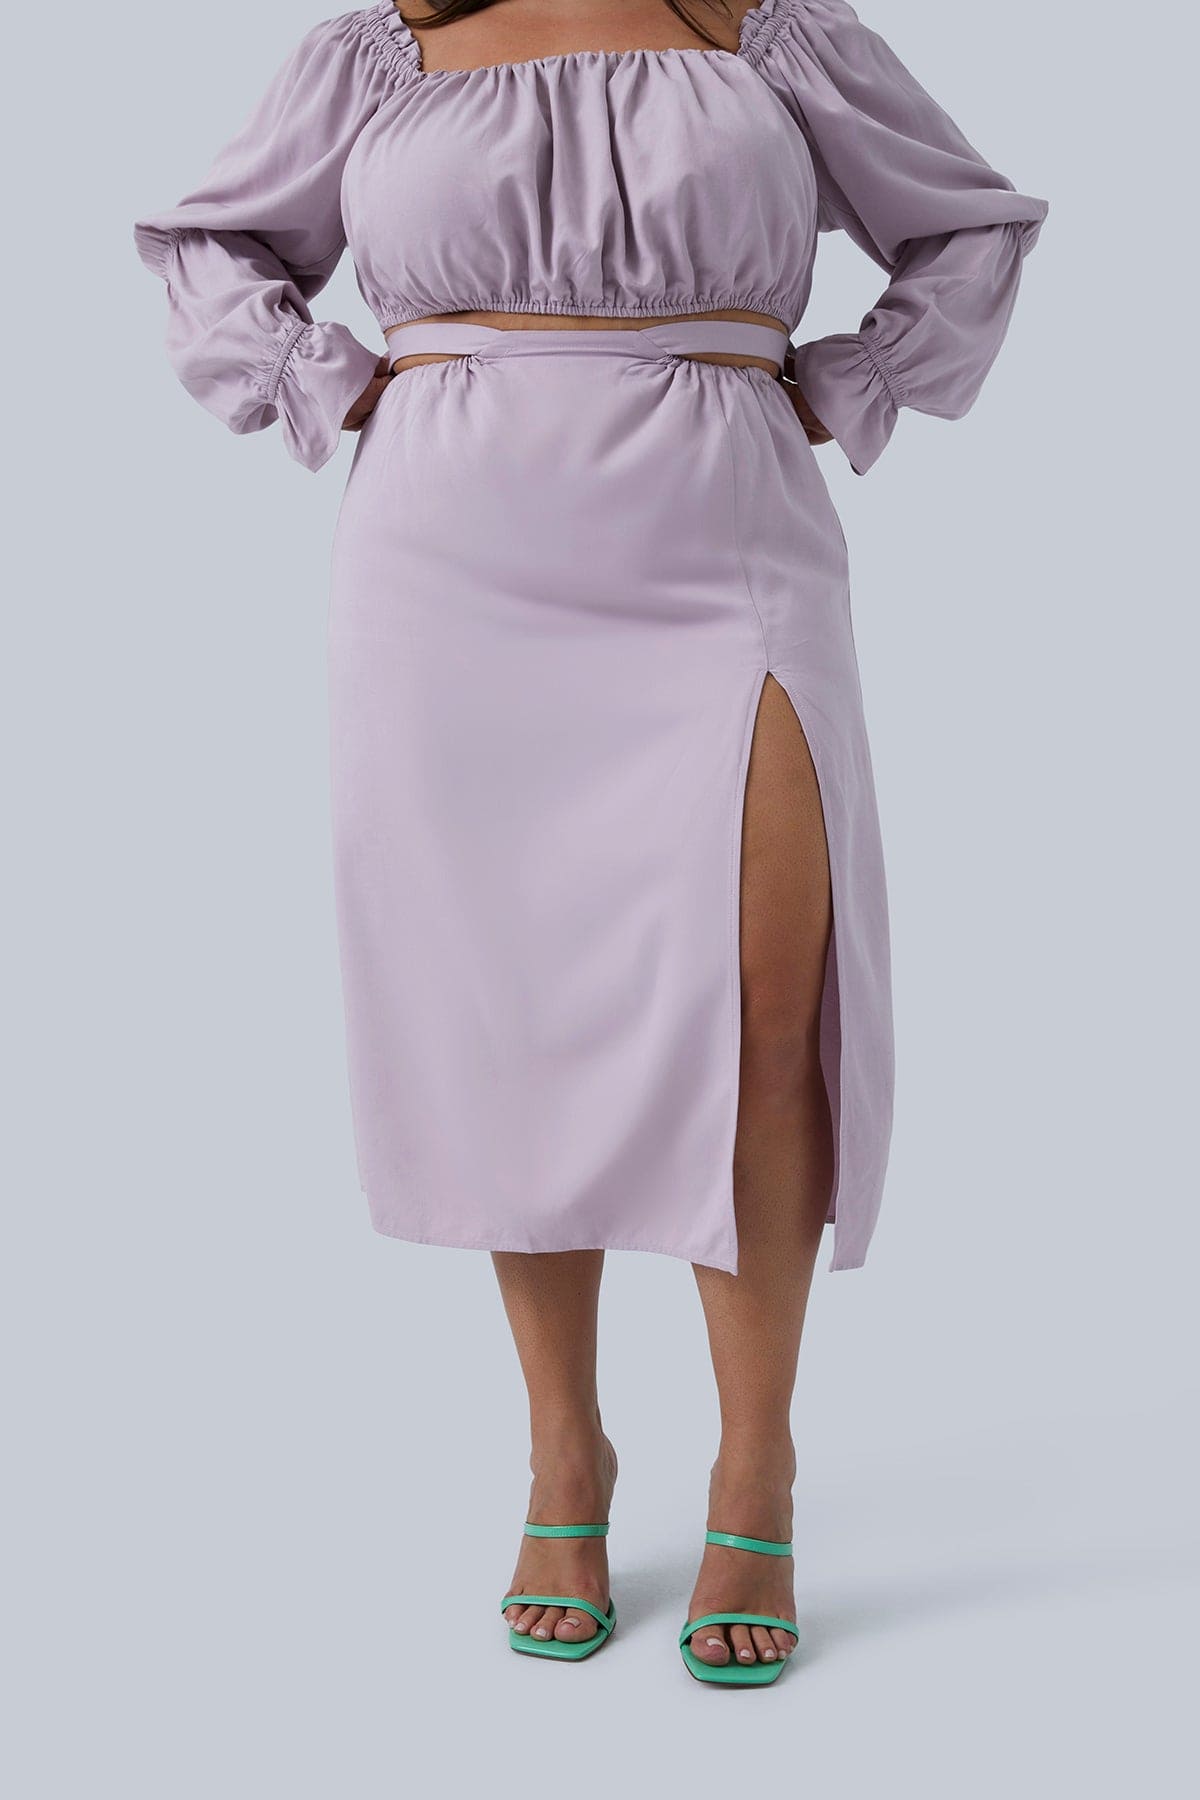 Full length view of the Gia Skirt size 2X in lilac. Slit is thigh high and this plus size skirt can be paired with the Gia top also shown here.